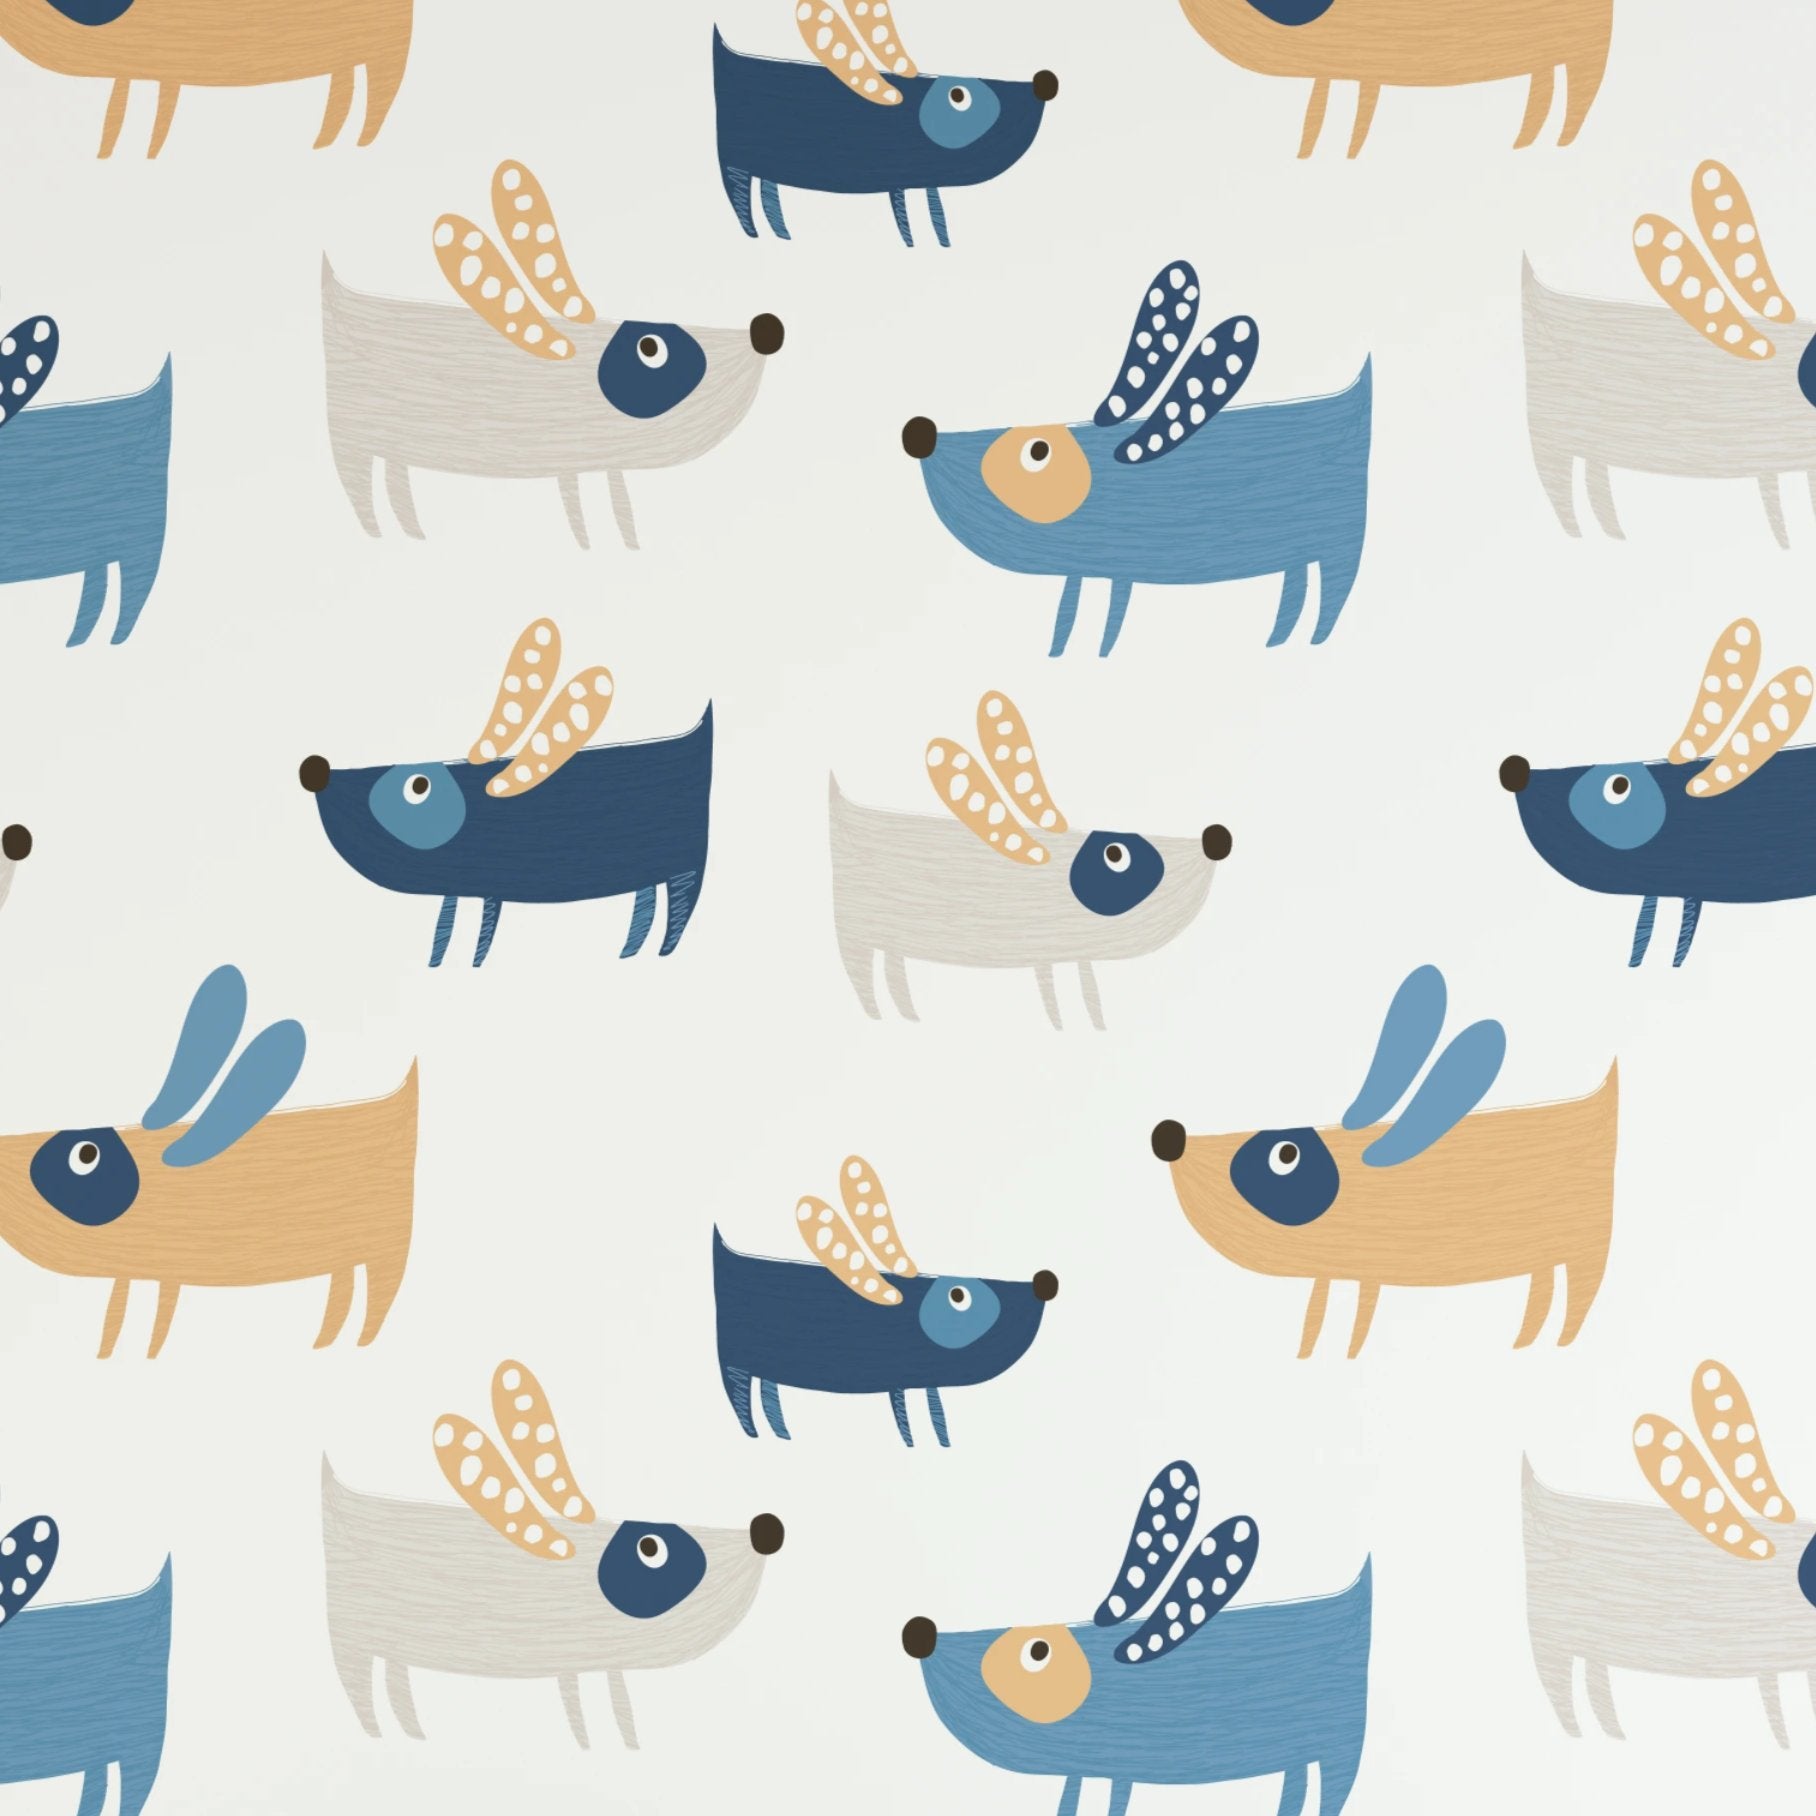 Patterned flying dogs kids wallpaper in pastel colors for nursery or playroom decoration